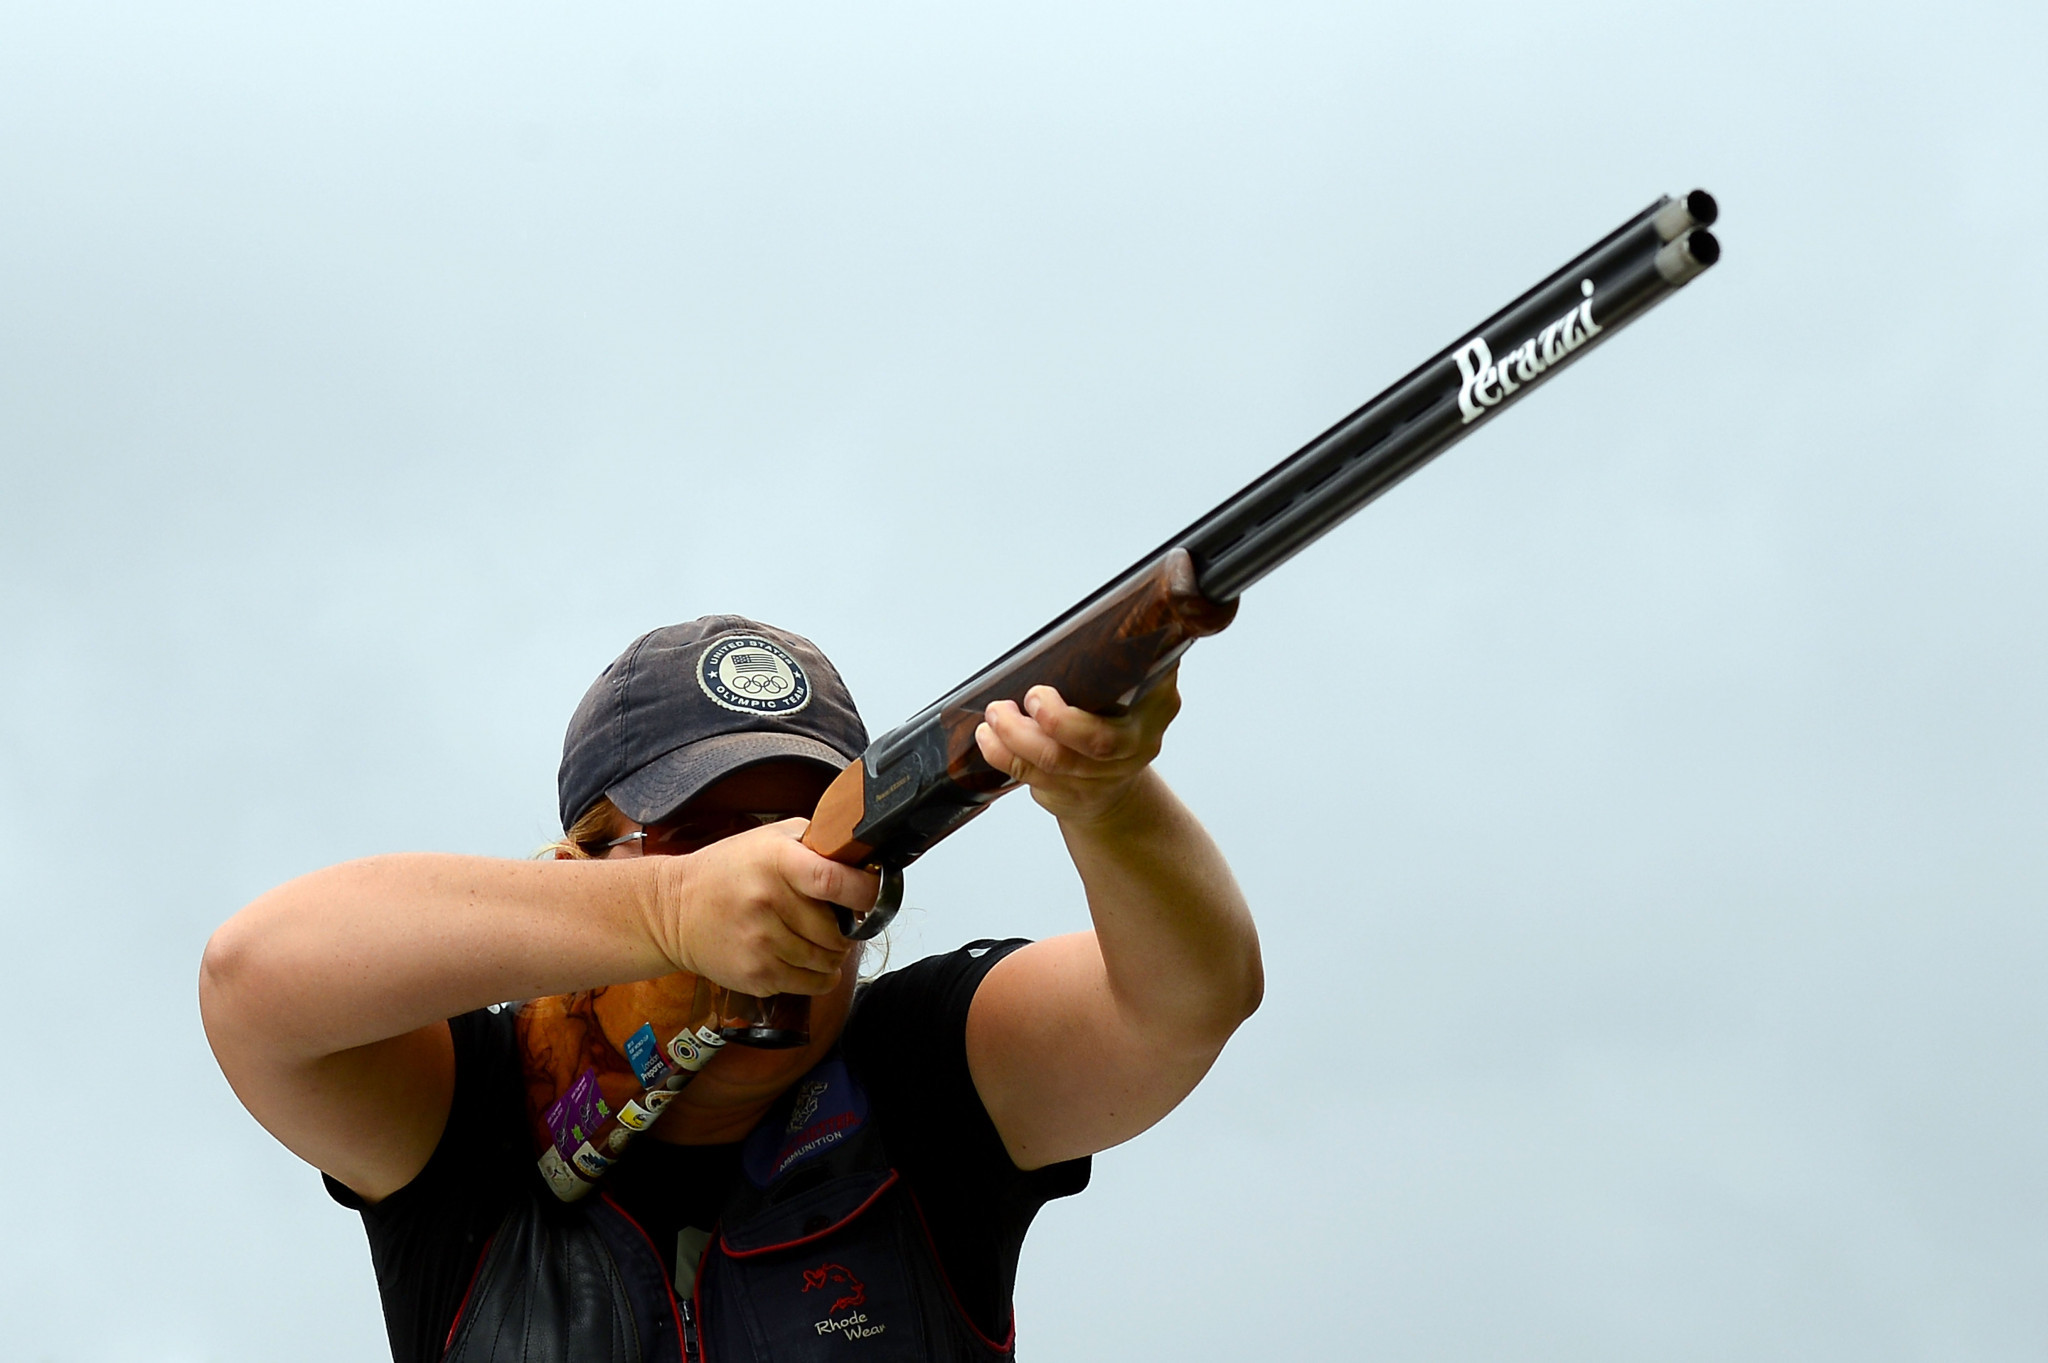 Kimberly Rhode of the United States took her 20th ISSF Shotgun World Cup medal in Al Ain ©Getty Images